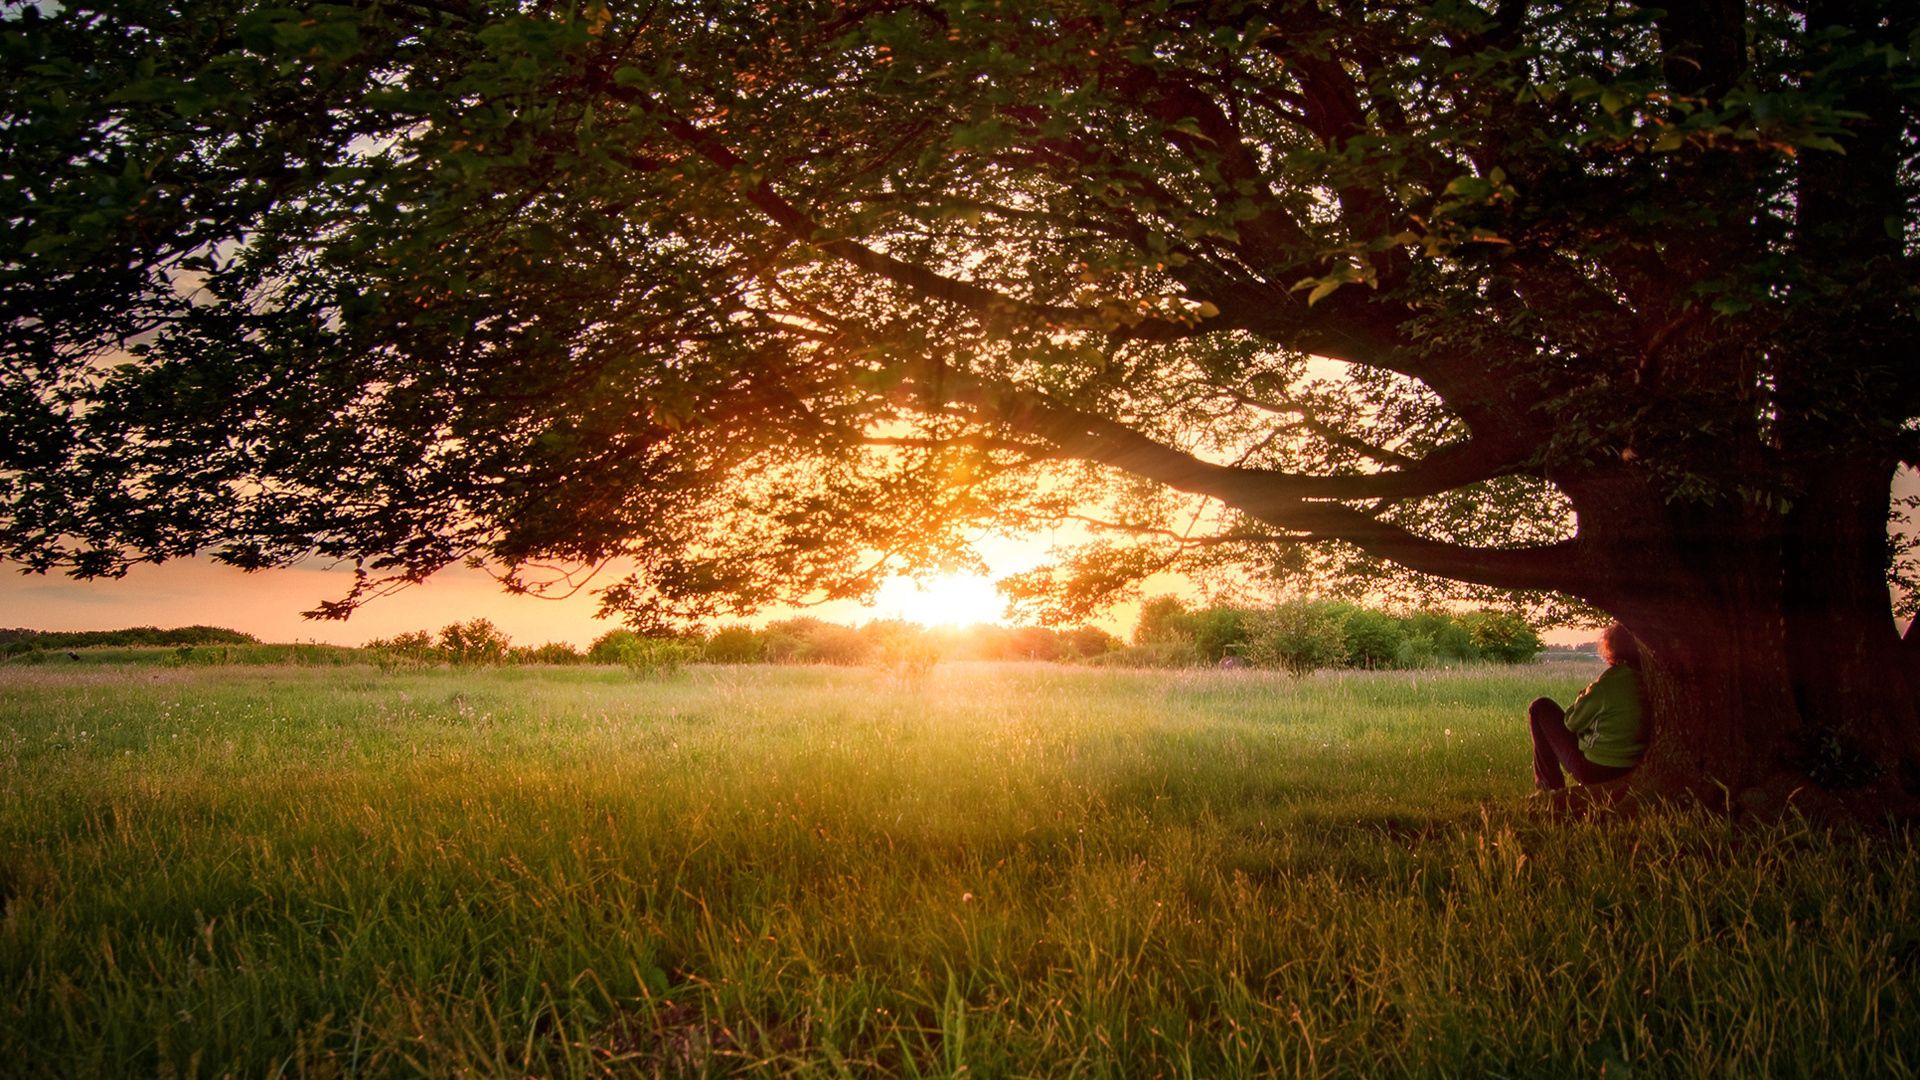 field, nature, sunset, wood, tree, krone, crown, branches, branch, evening, human, person, scattered, dreams, reverie, spreading 1080p